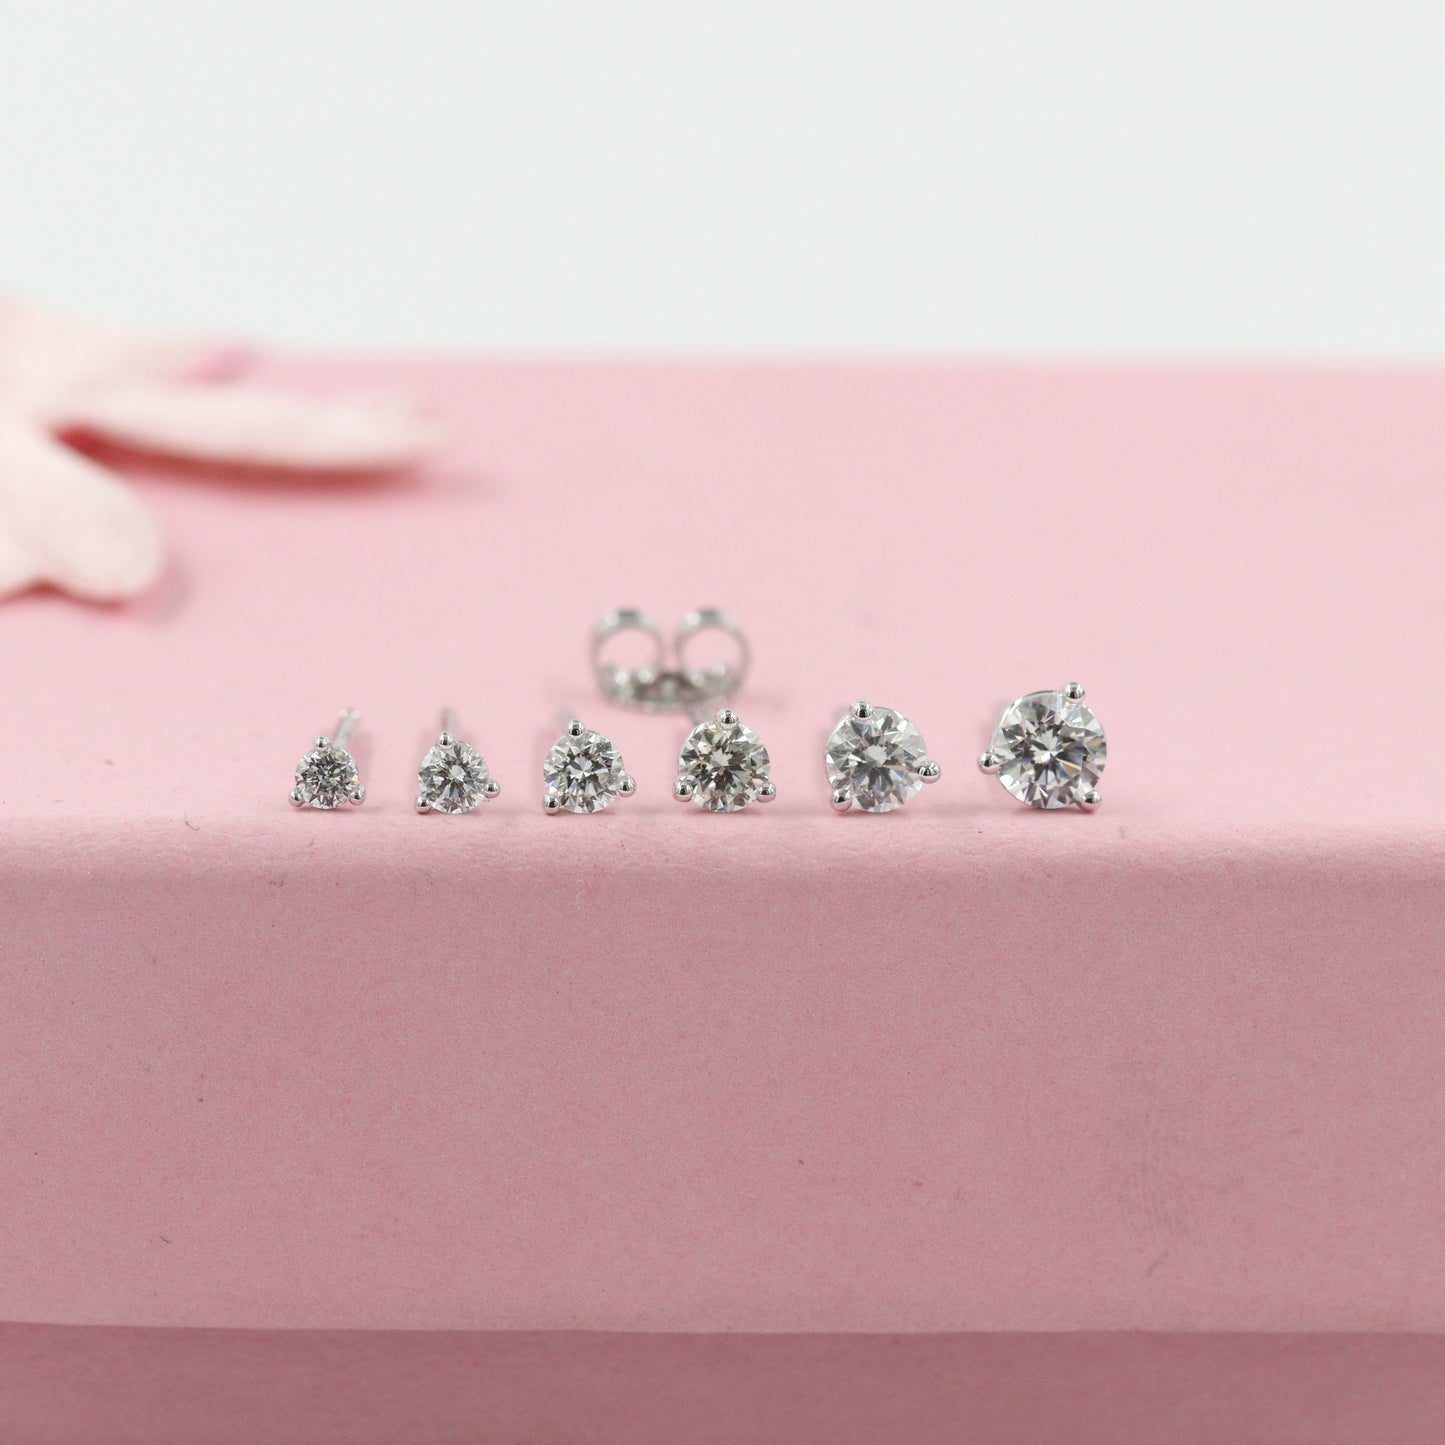 Solitaire Natural Diamond Earring/Three Prong Set Diamond Earrings/Stud Earring/Solitaire Stud Earrings/Dainty Simple Earrings/Gifts for her